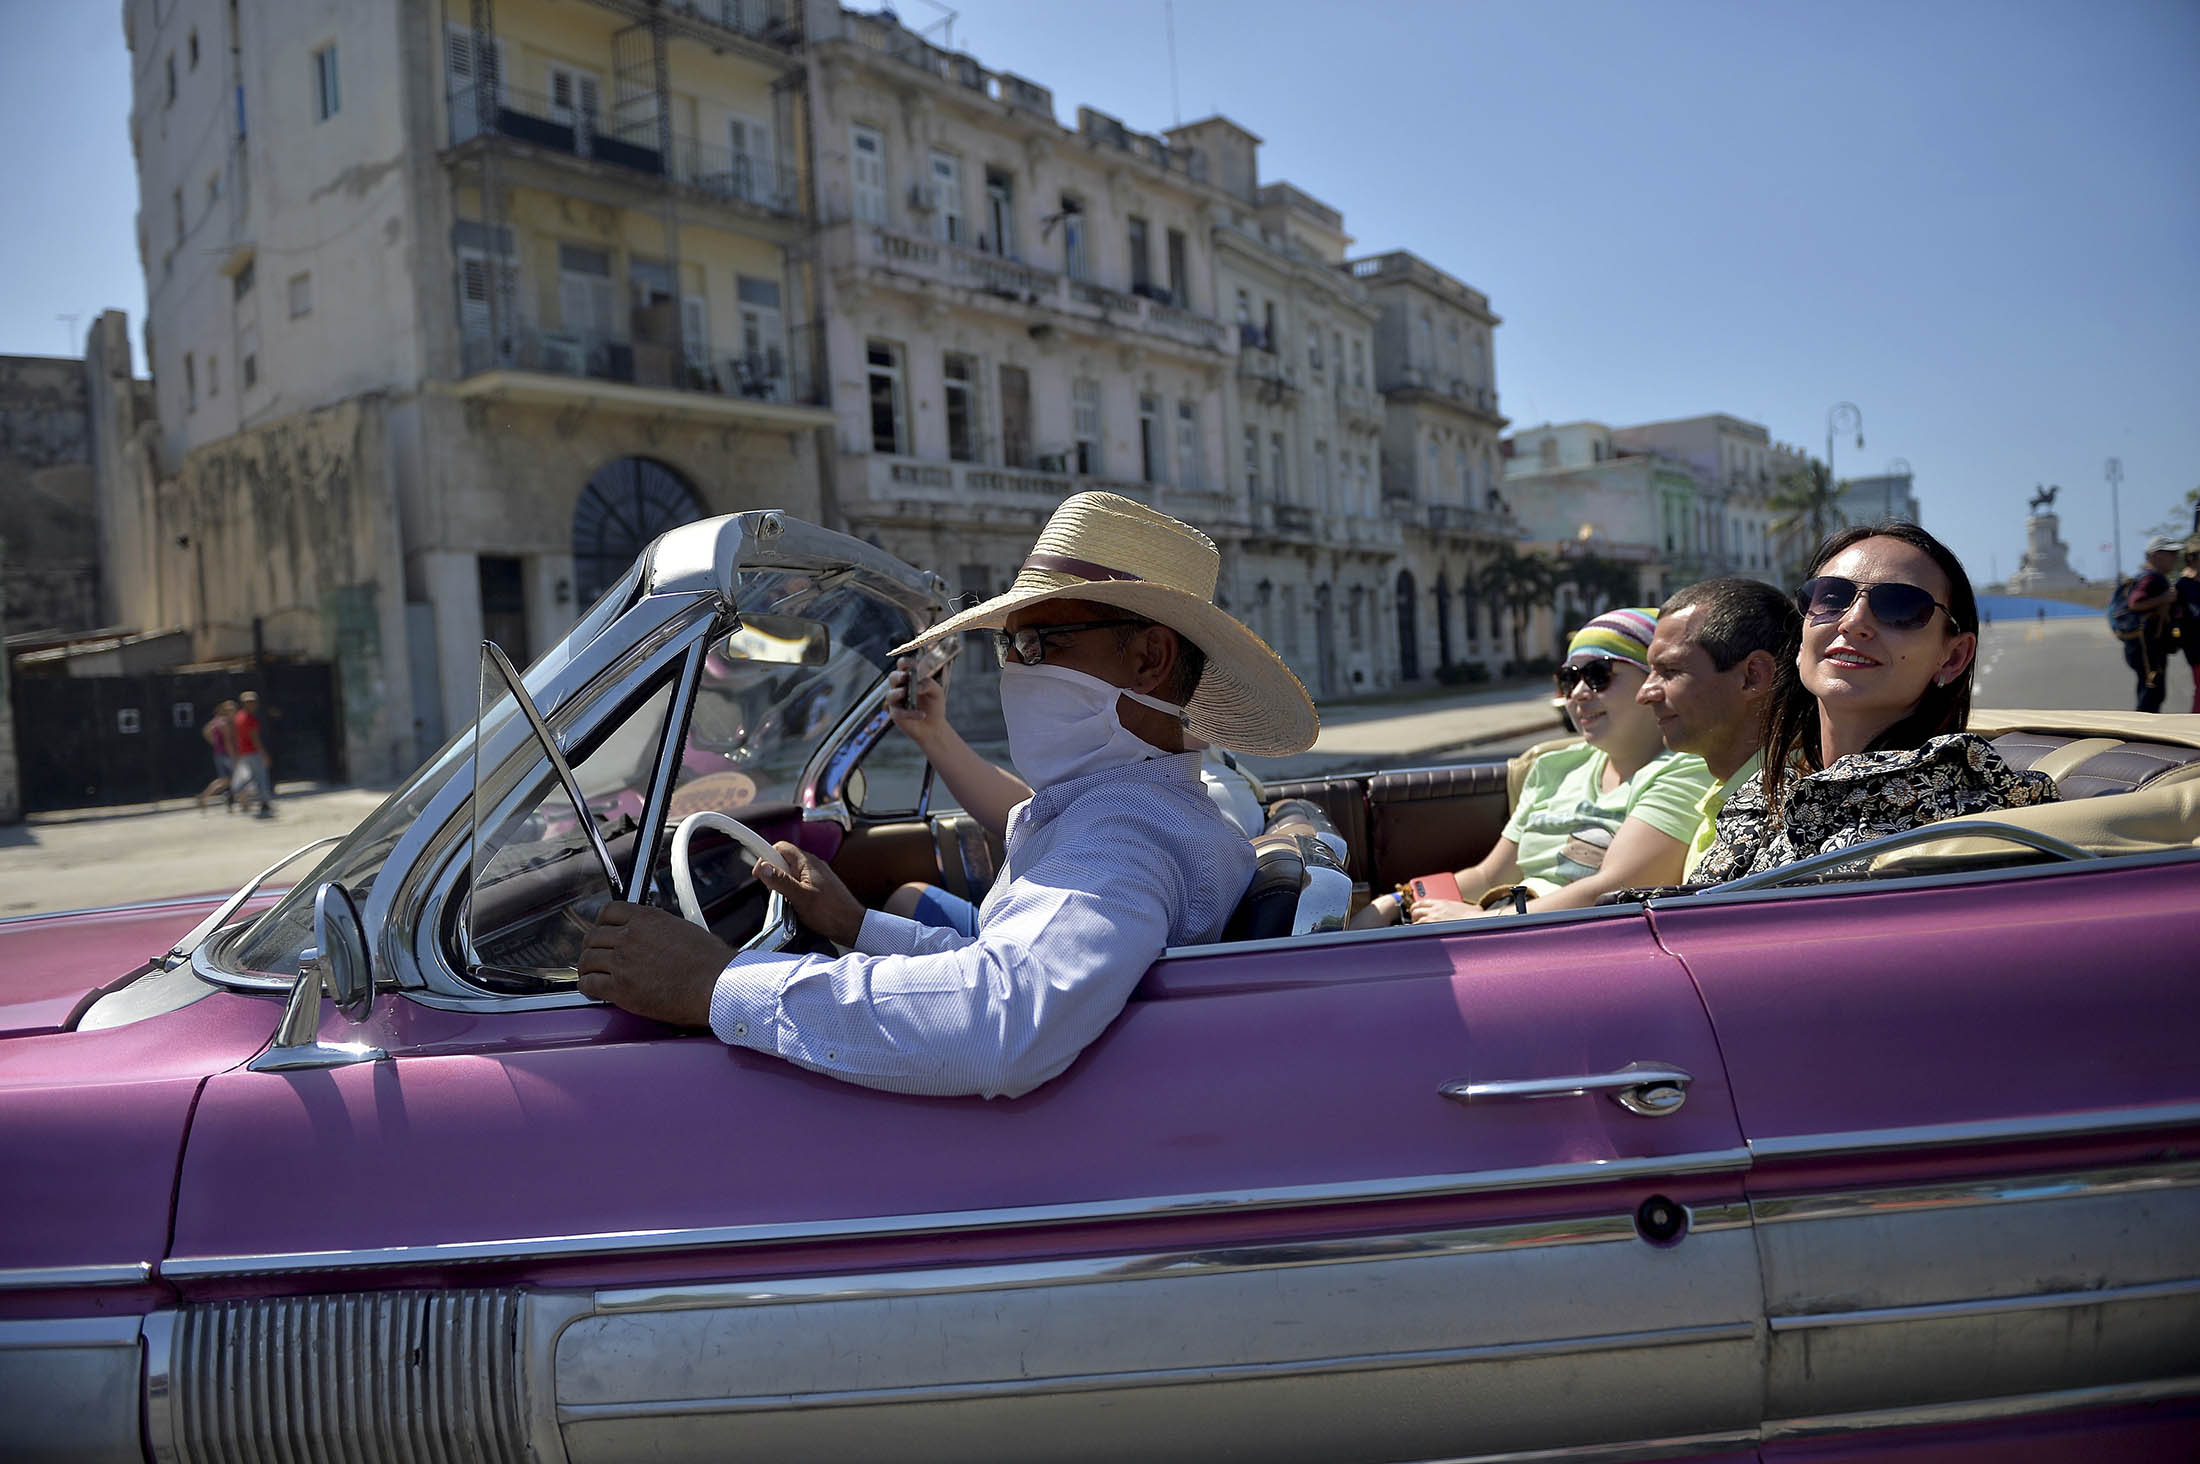 A private taxi driver wears a protective face mask while driving tourists around Havana.